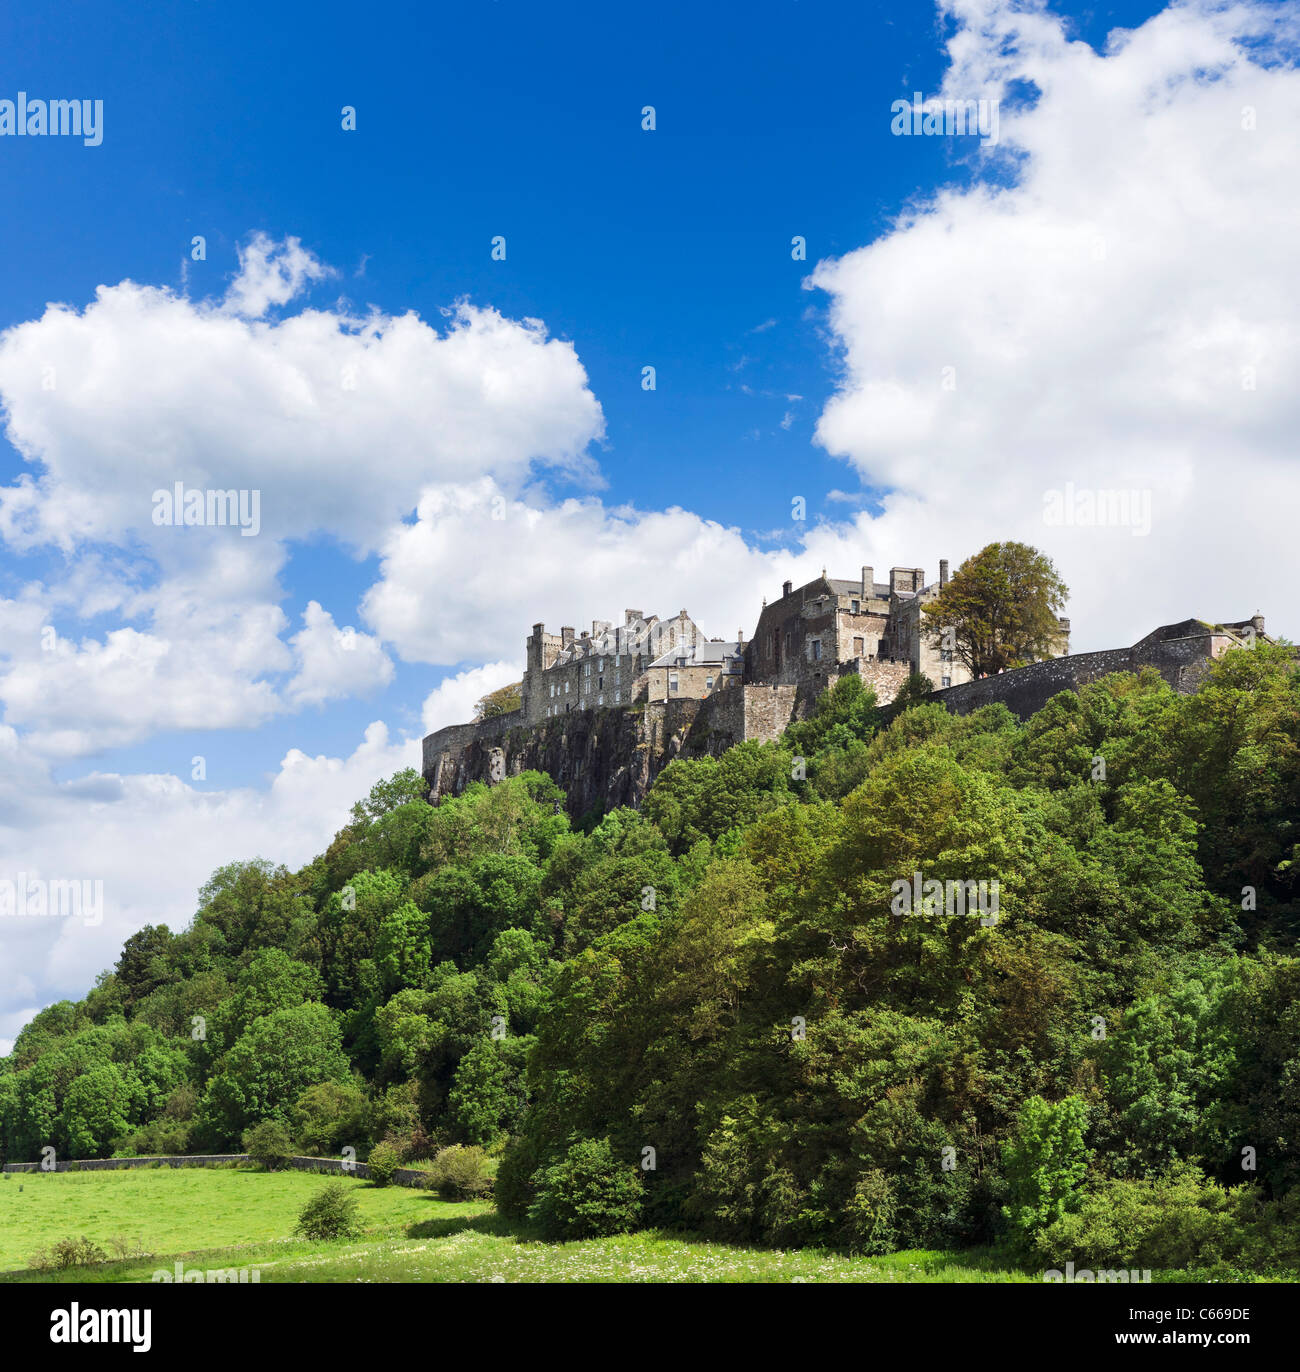 Stirling Castle viewed from King's Knot Gardens, Stirling, Scotland, UK. Scottish castles. Stock Photo